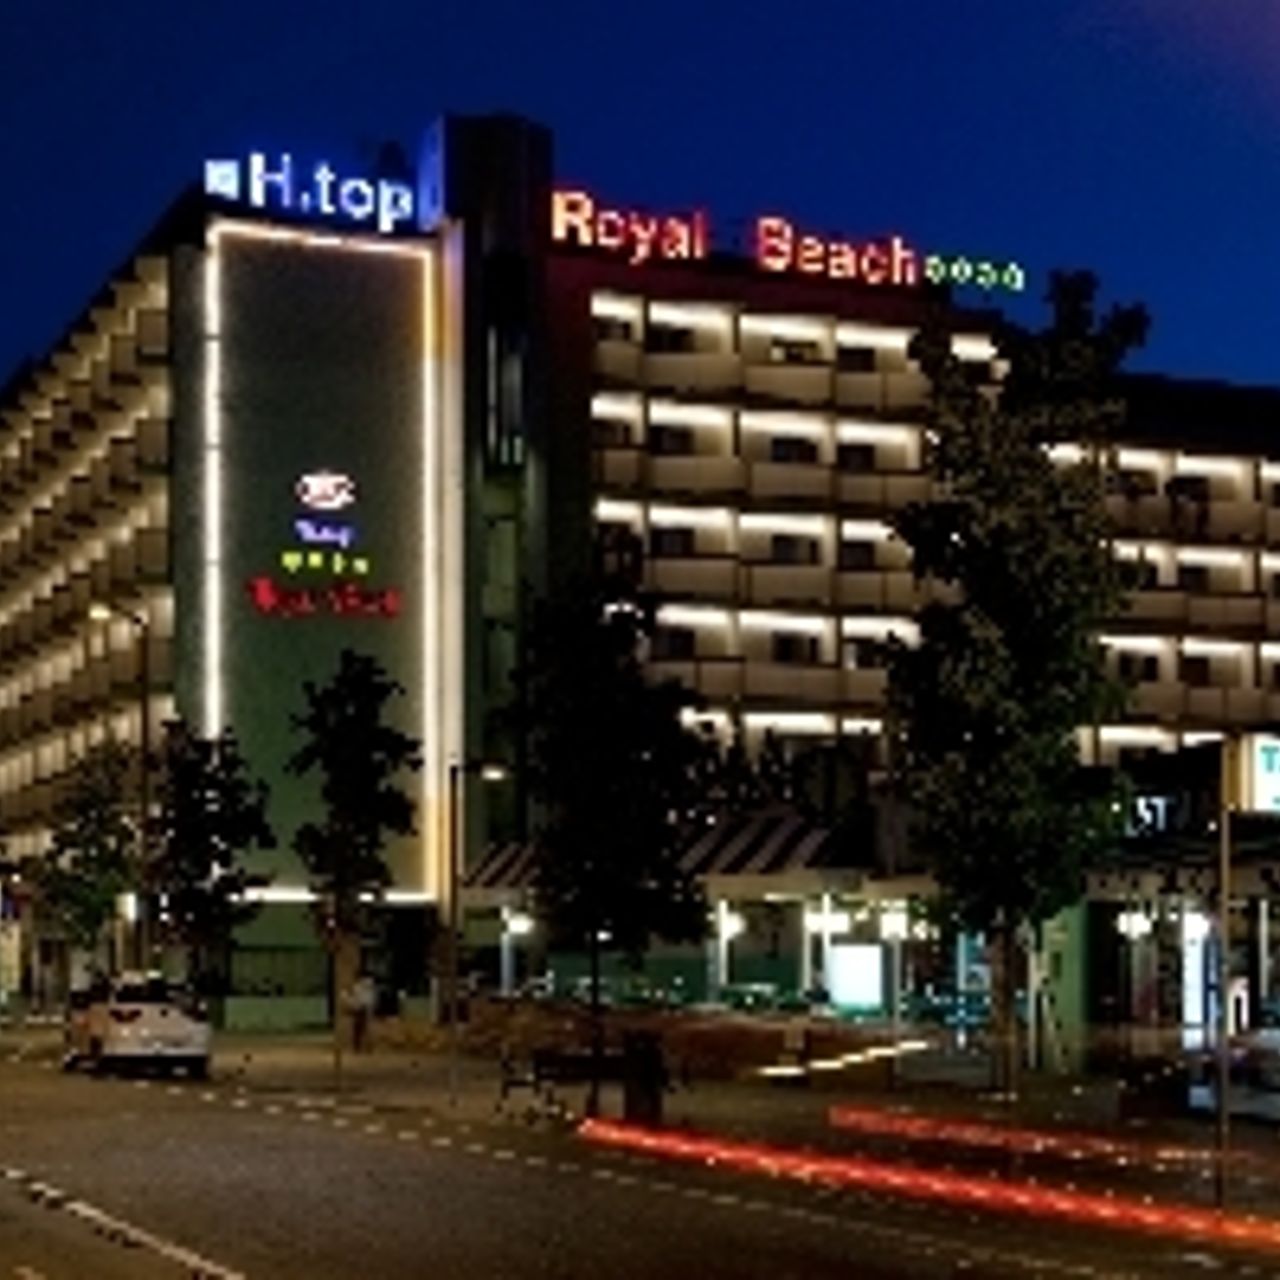 Royal Beach Lloret de Mar - Great prices at HOTEL INFO